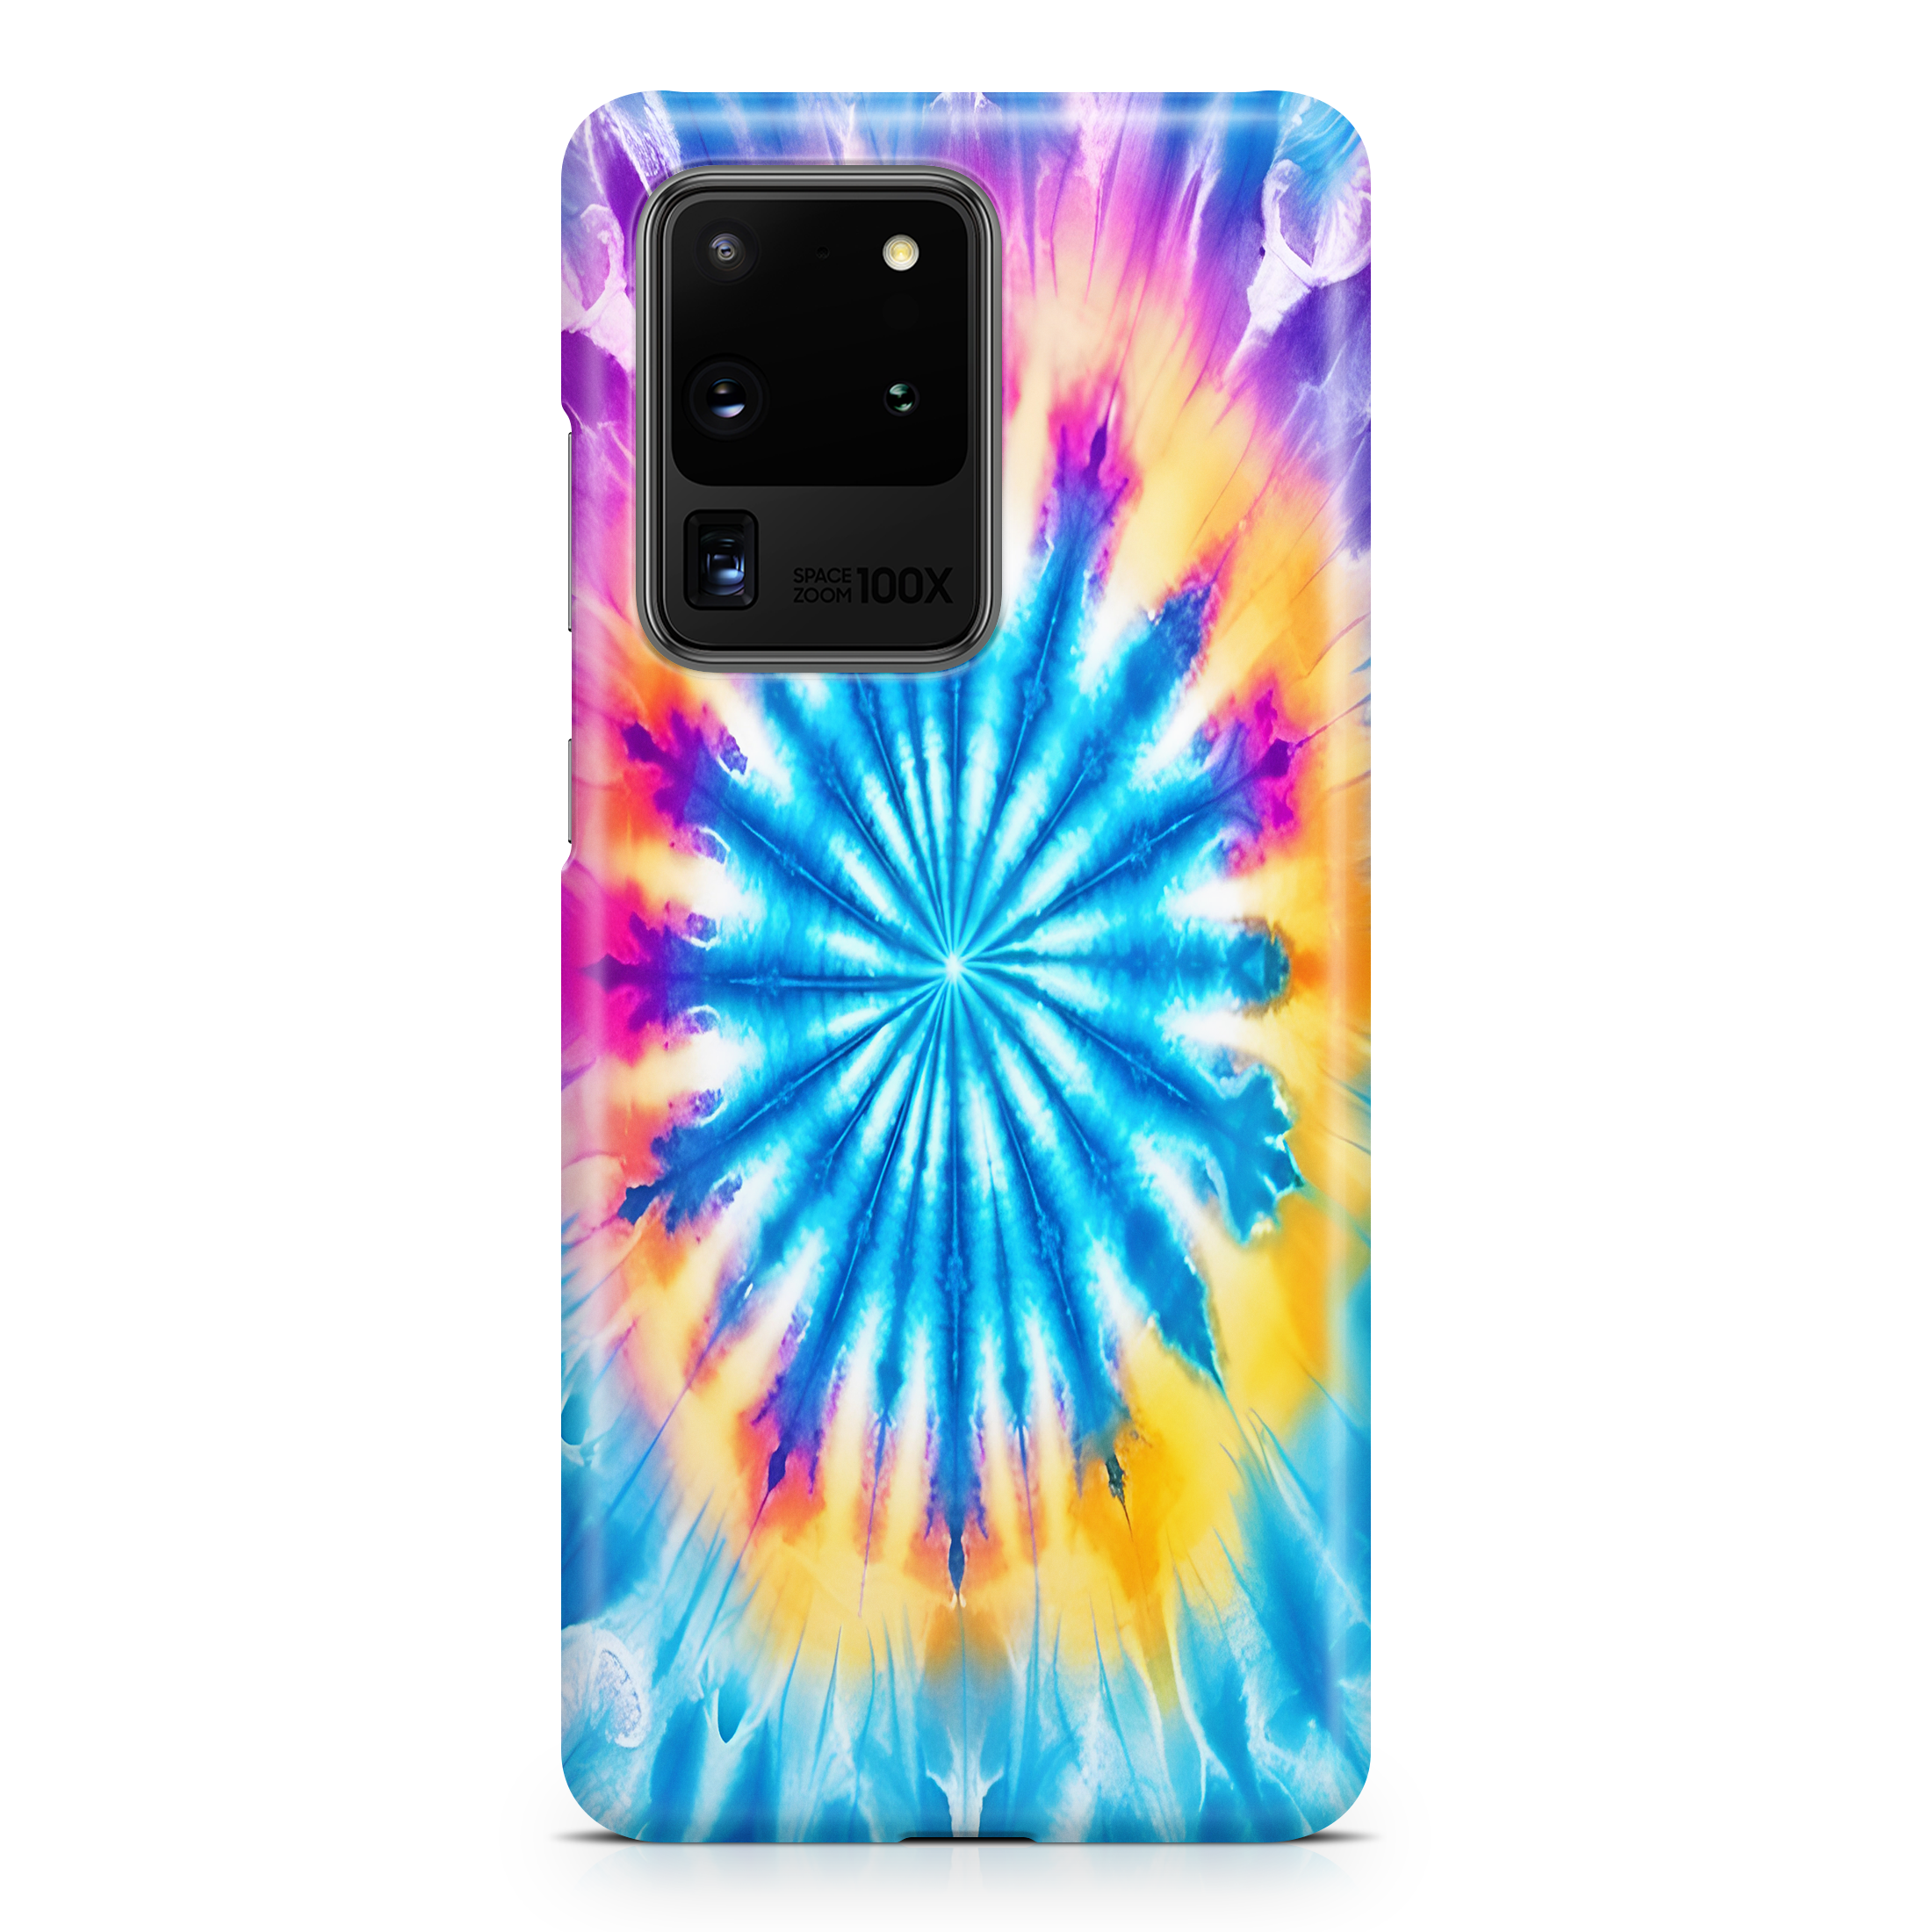 Hippie Tide - Samsung phone case designs by CaseSwagger